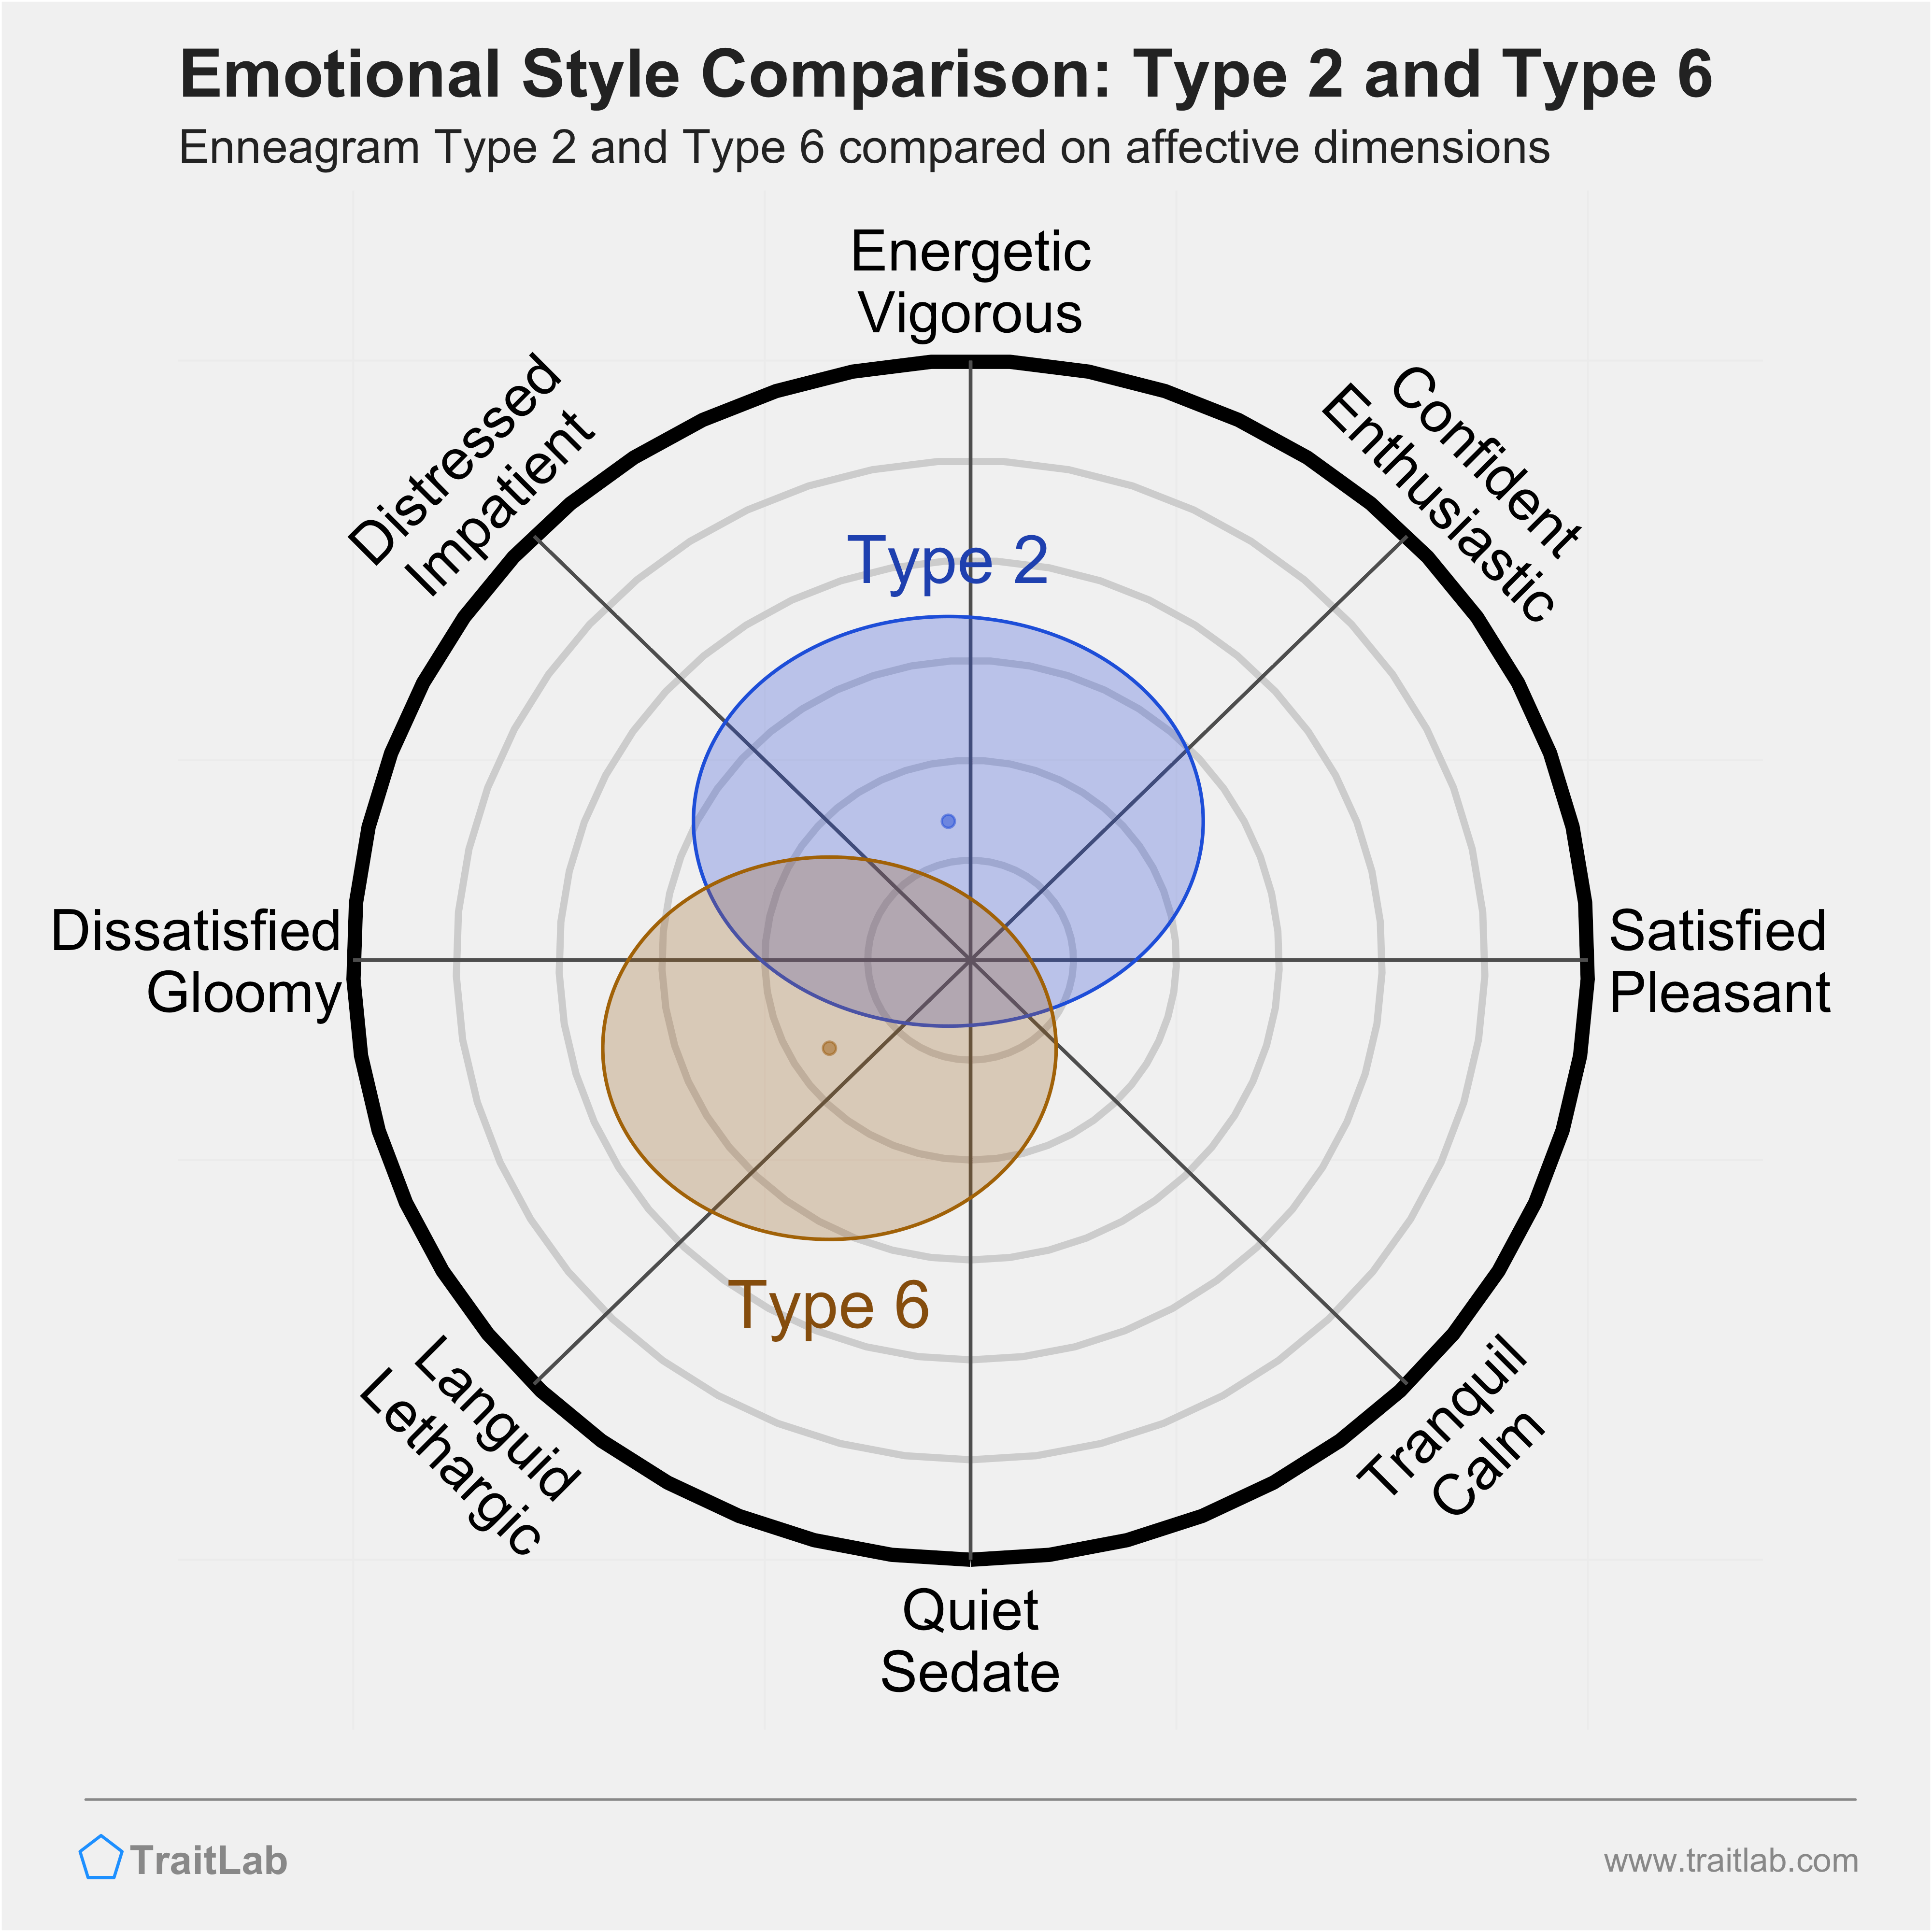 Type 2 and Type 6 comparison across emotional (affective) dimensions